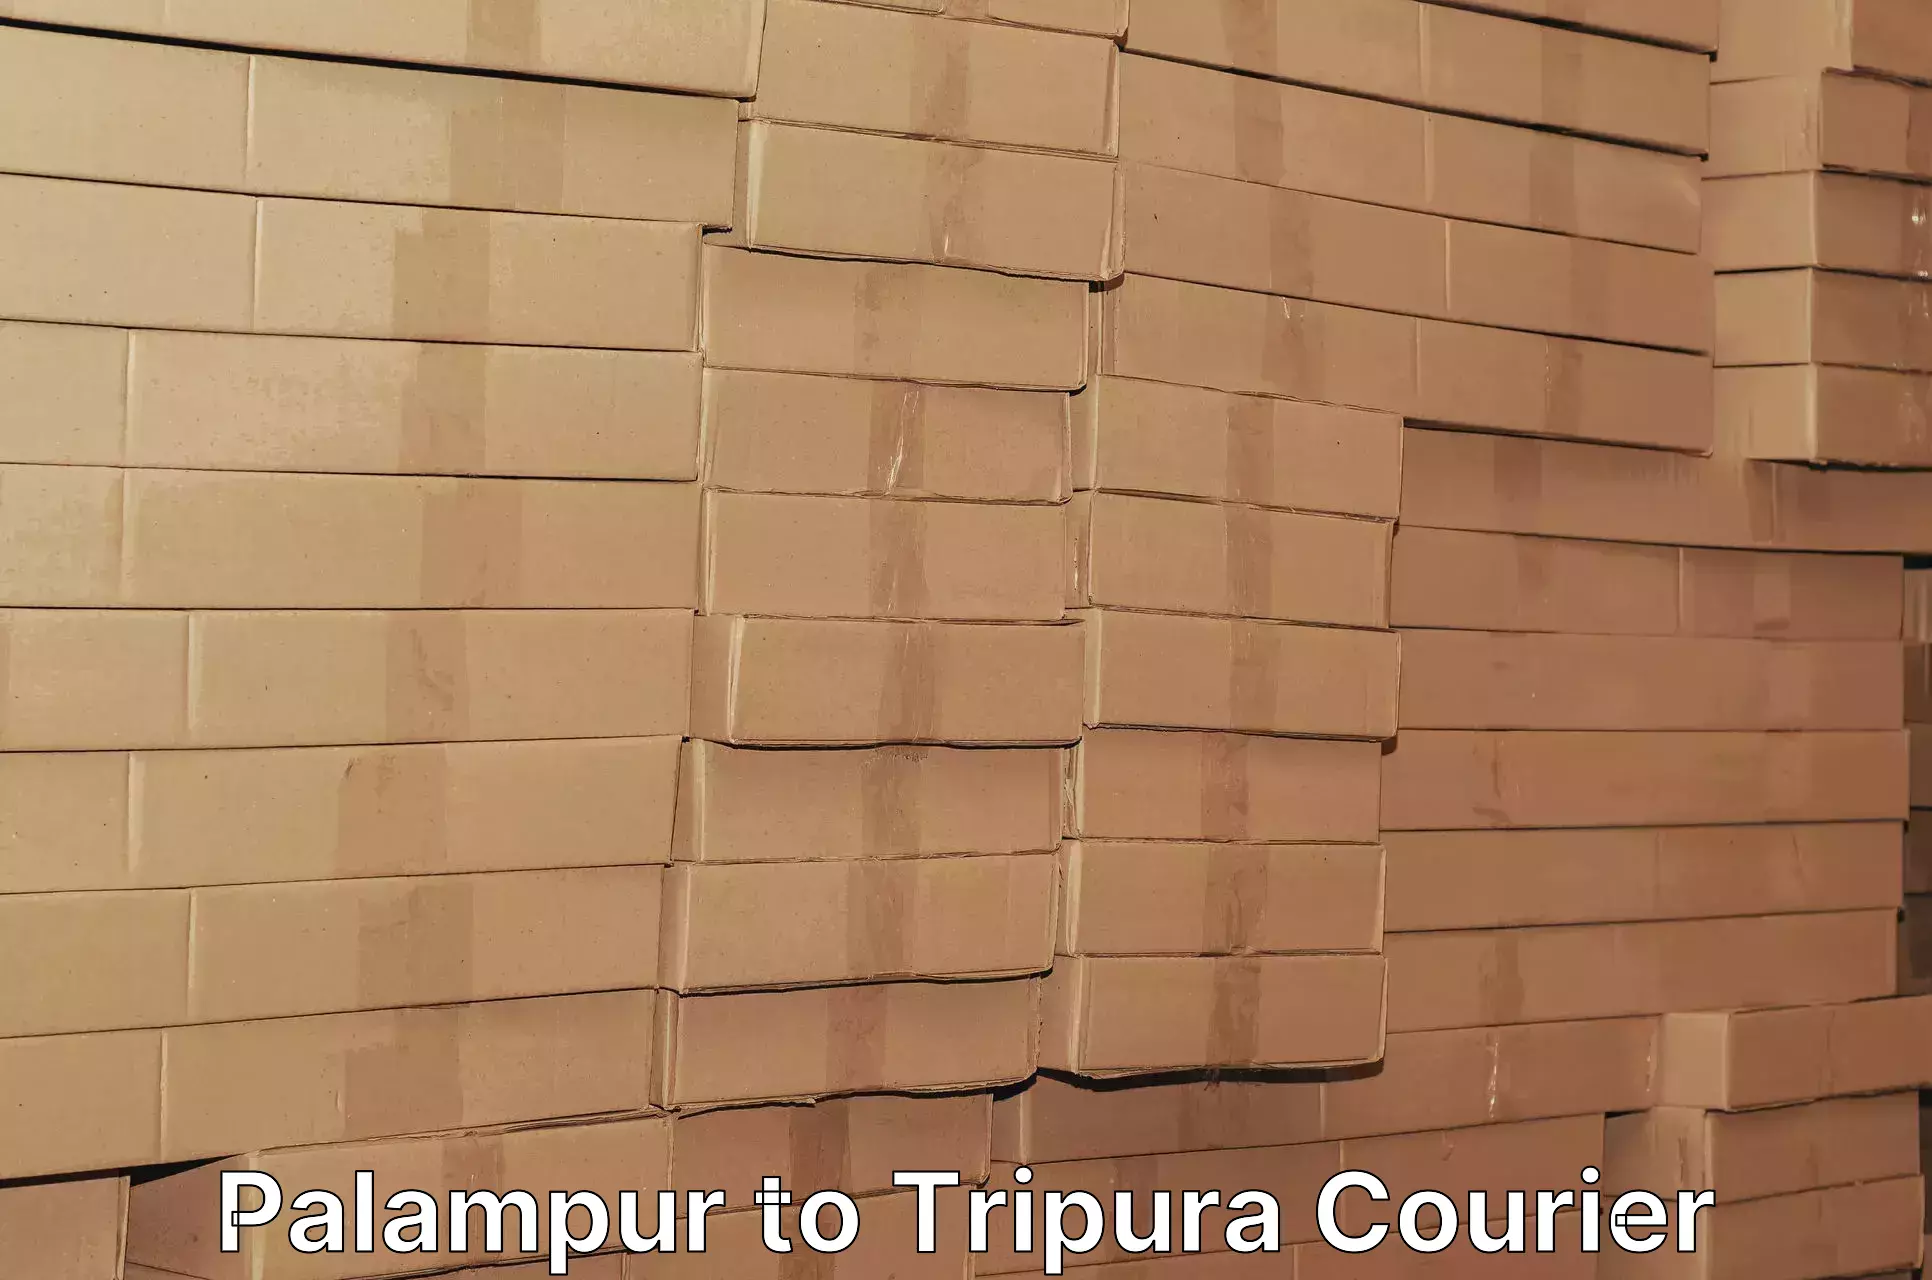 Cargo delivery service Palampur to Tripura